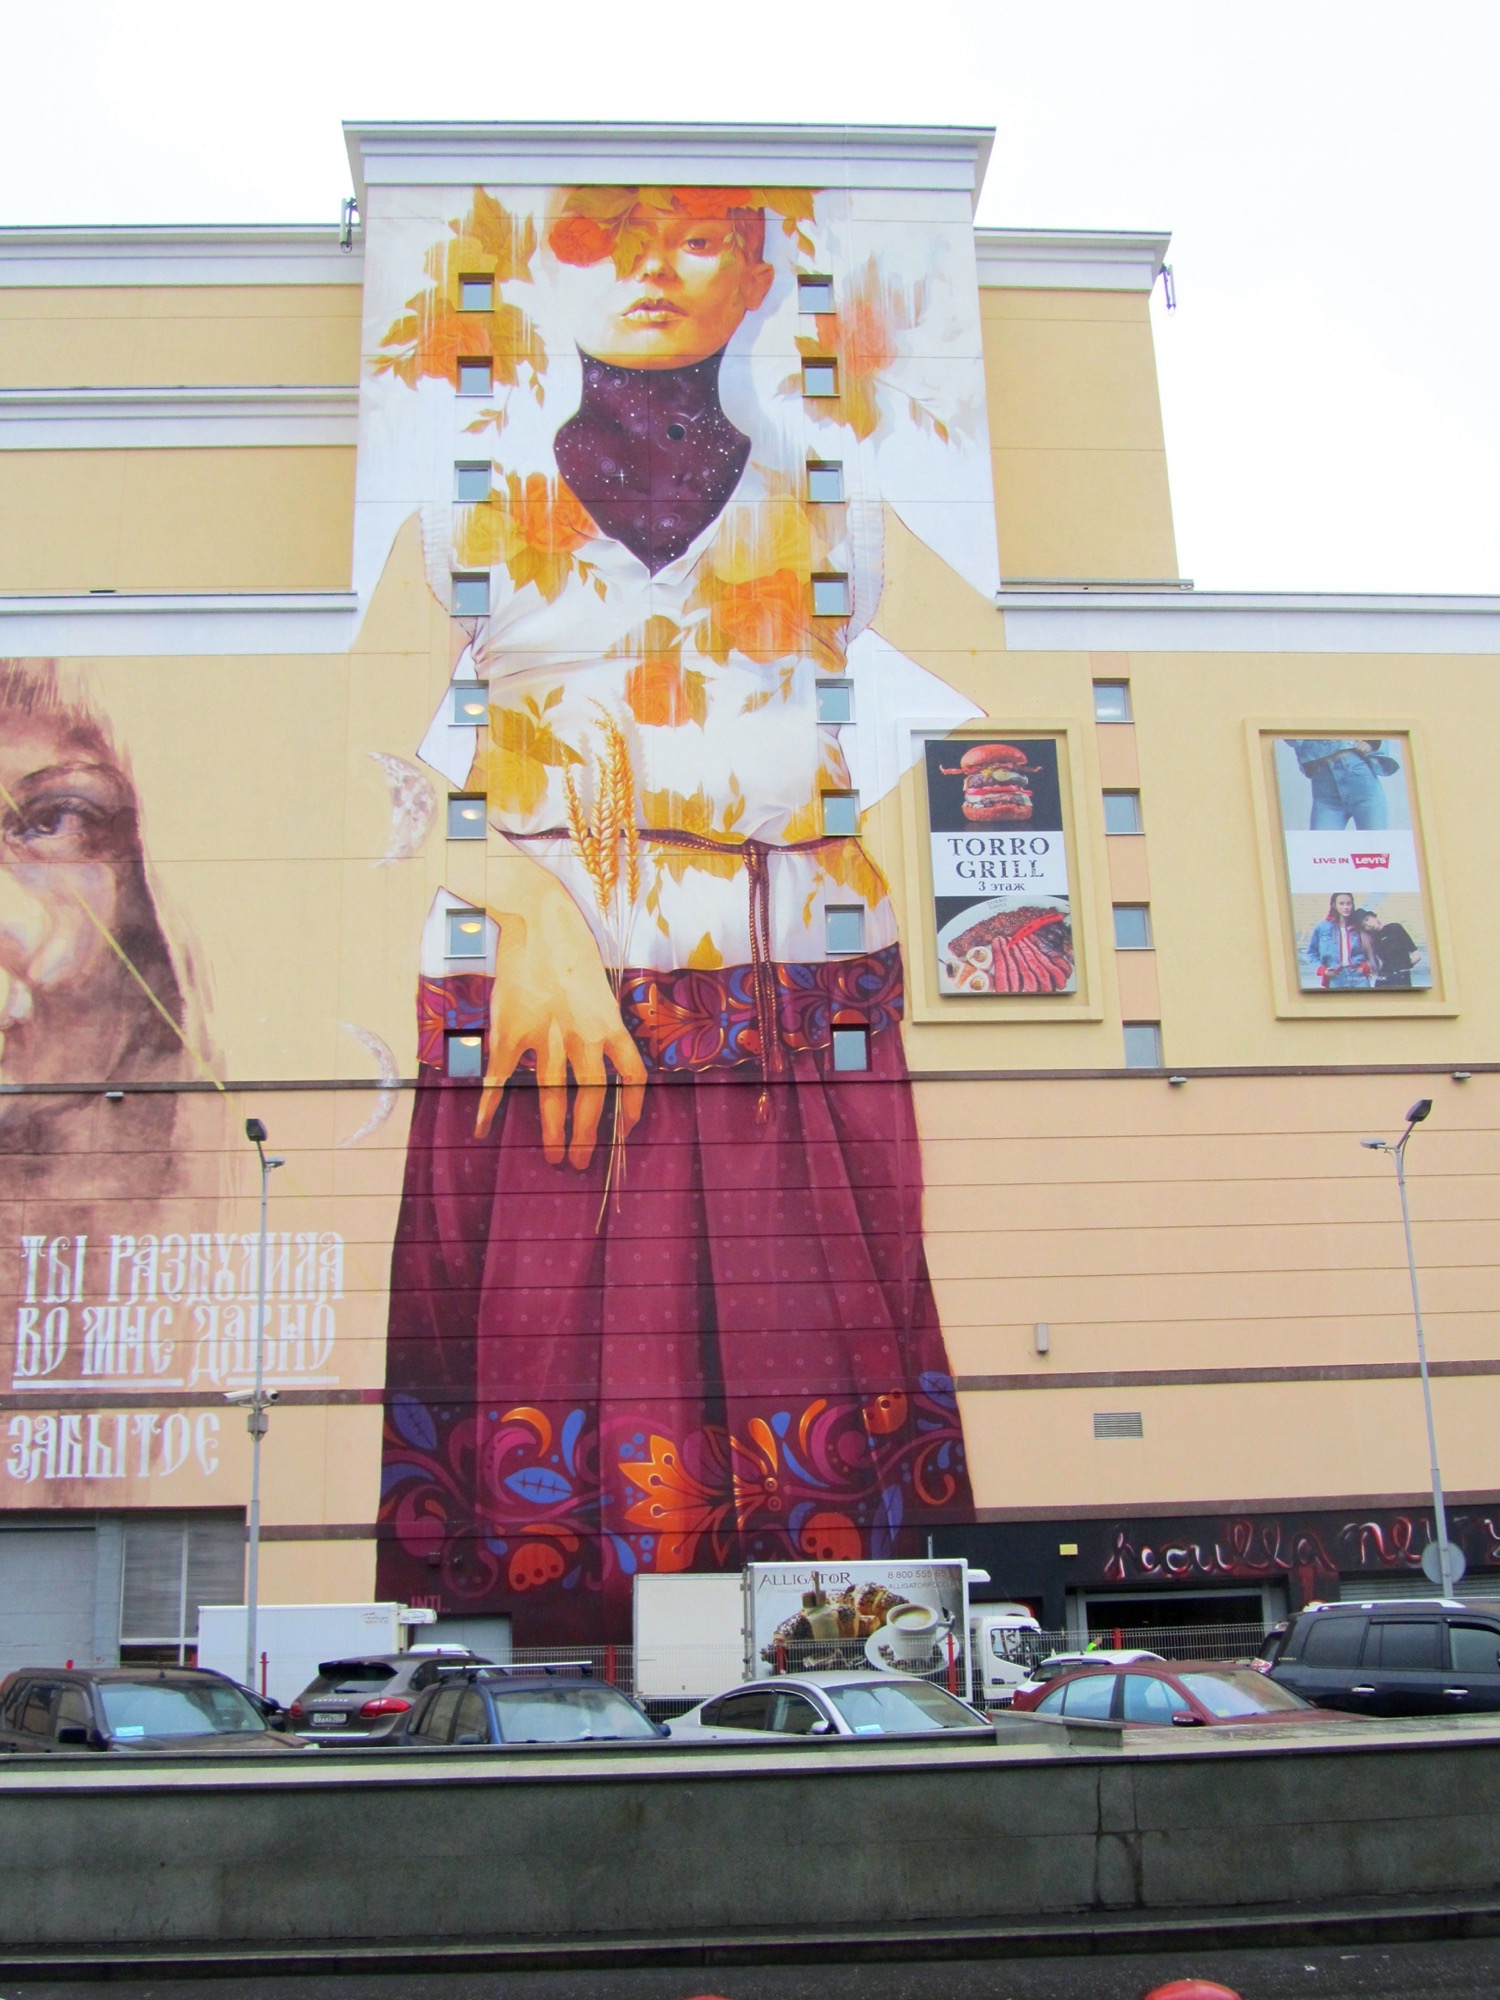 Graffiti 4363 Rabotnitsa (The Working Woman) by the artist Inti captured by elettrotajik in Moscow Russia